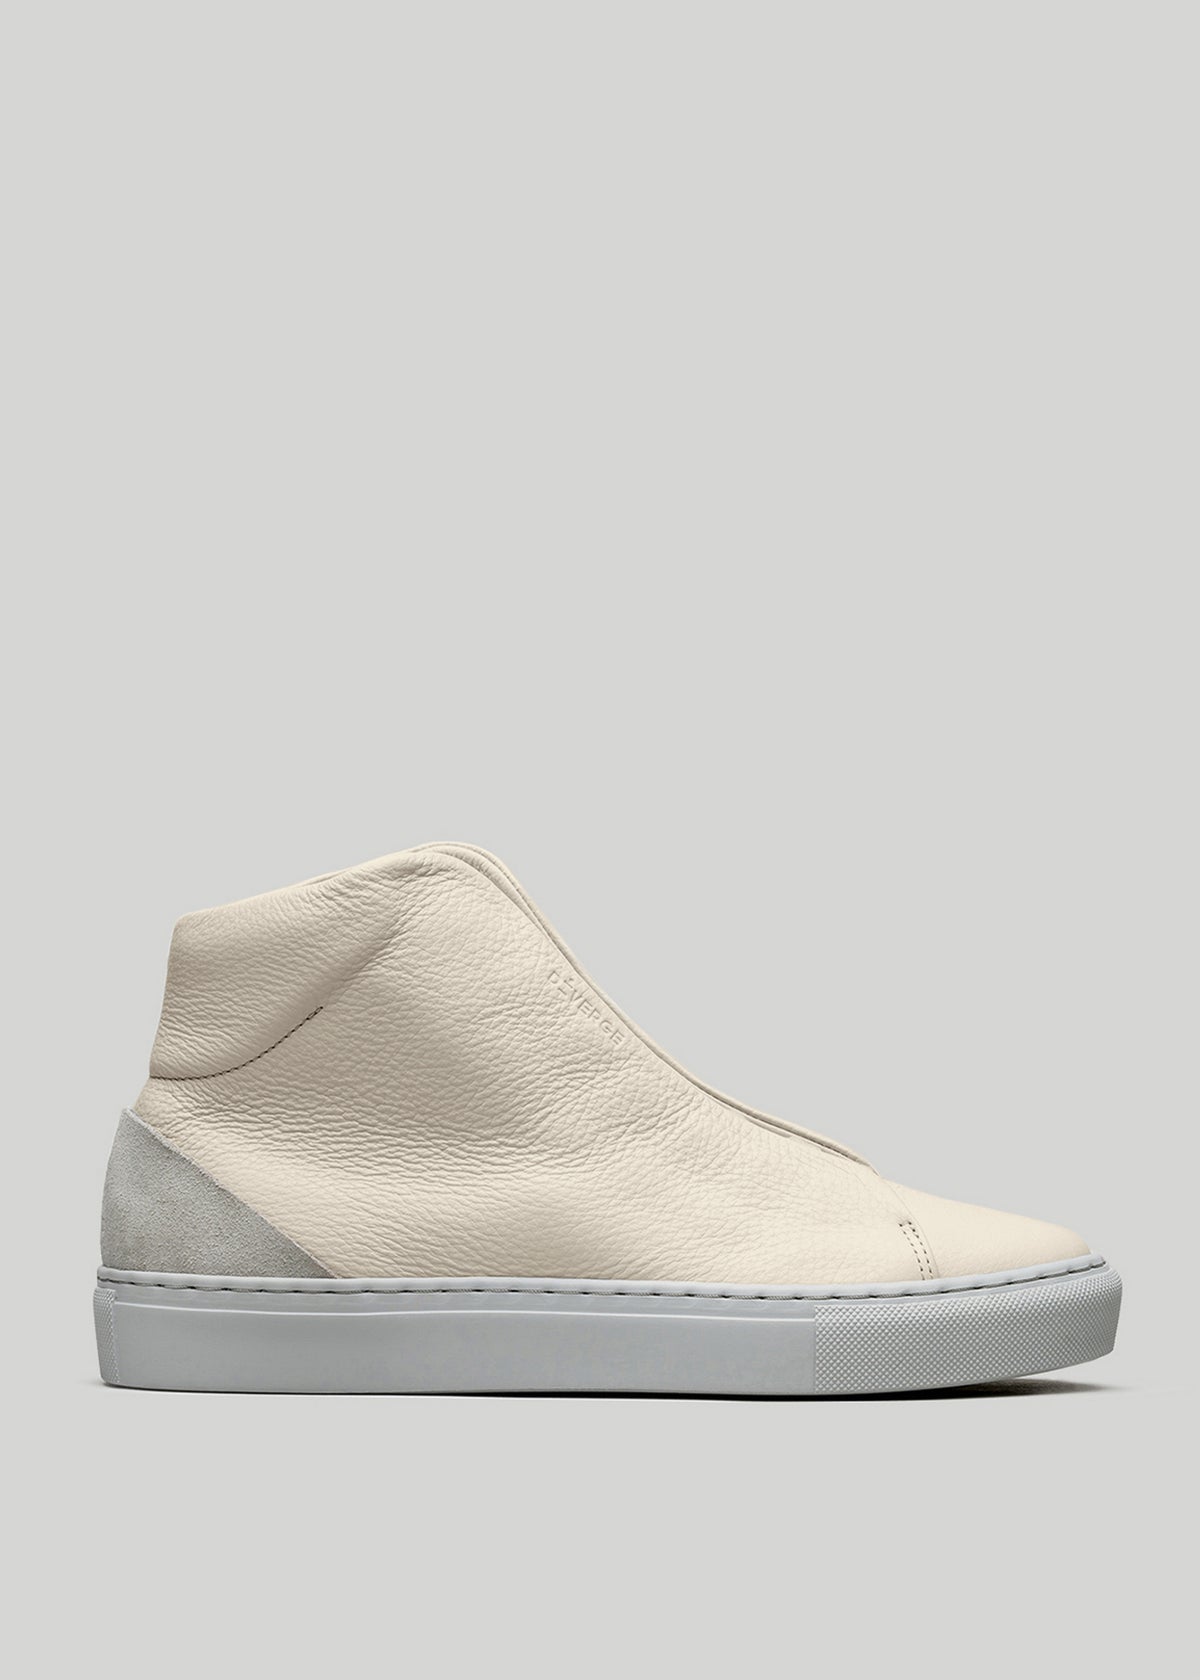 Side view of a V27 Beige Floater high-top sneaker with a textured surface and white sole against a light gray background.